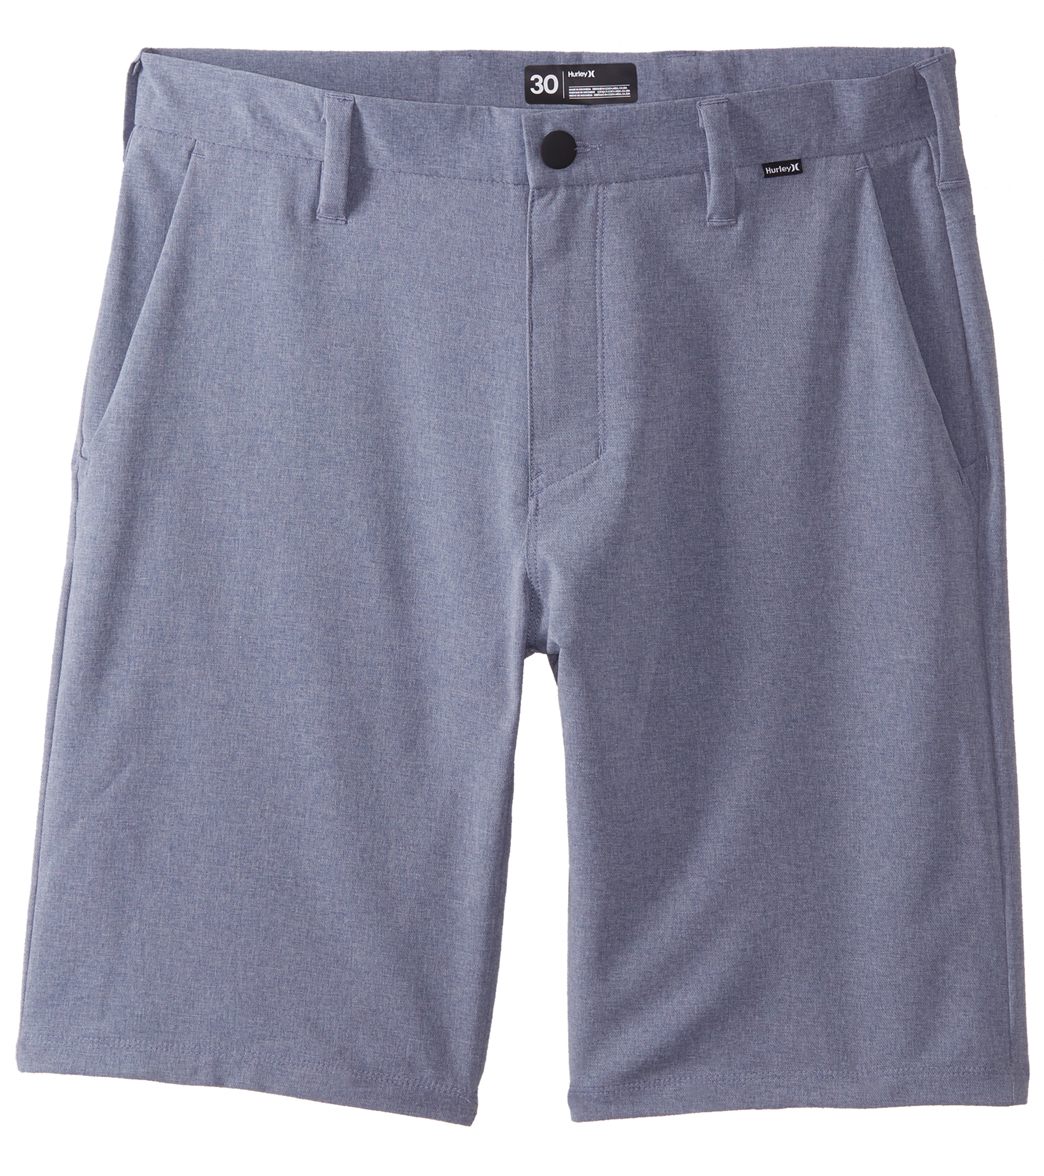 Hurley Men's Dri-Fit Chino Heather 21 Walkshorts - Obsidian 28 Polyester/Spandex - Swimoutlet.com